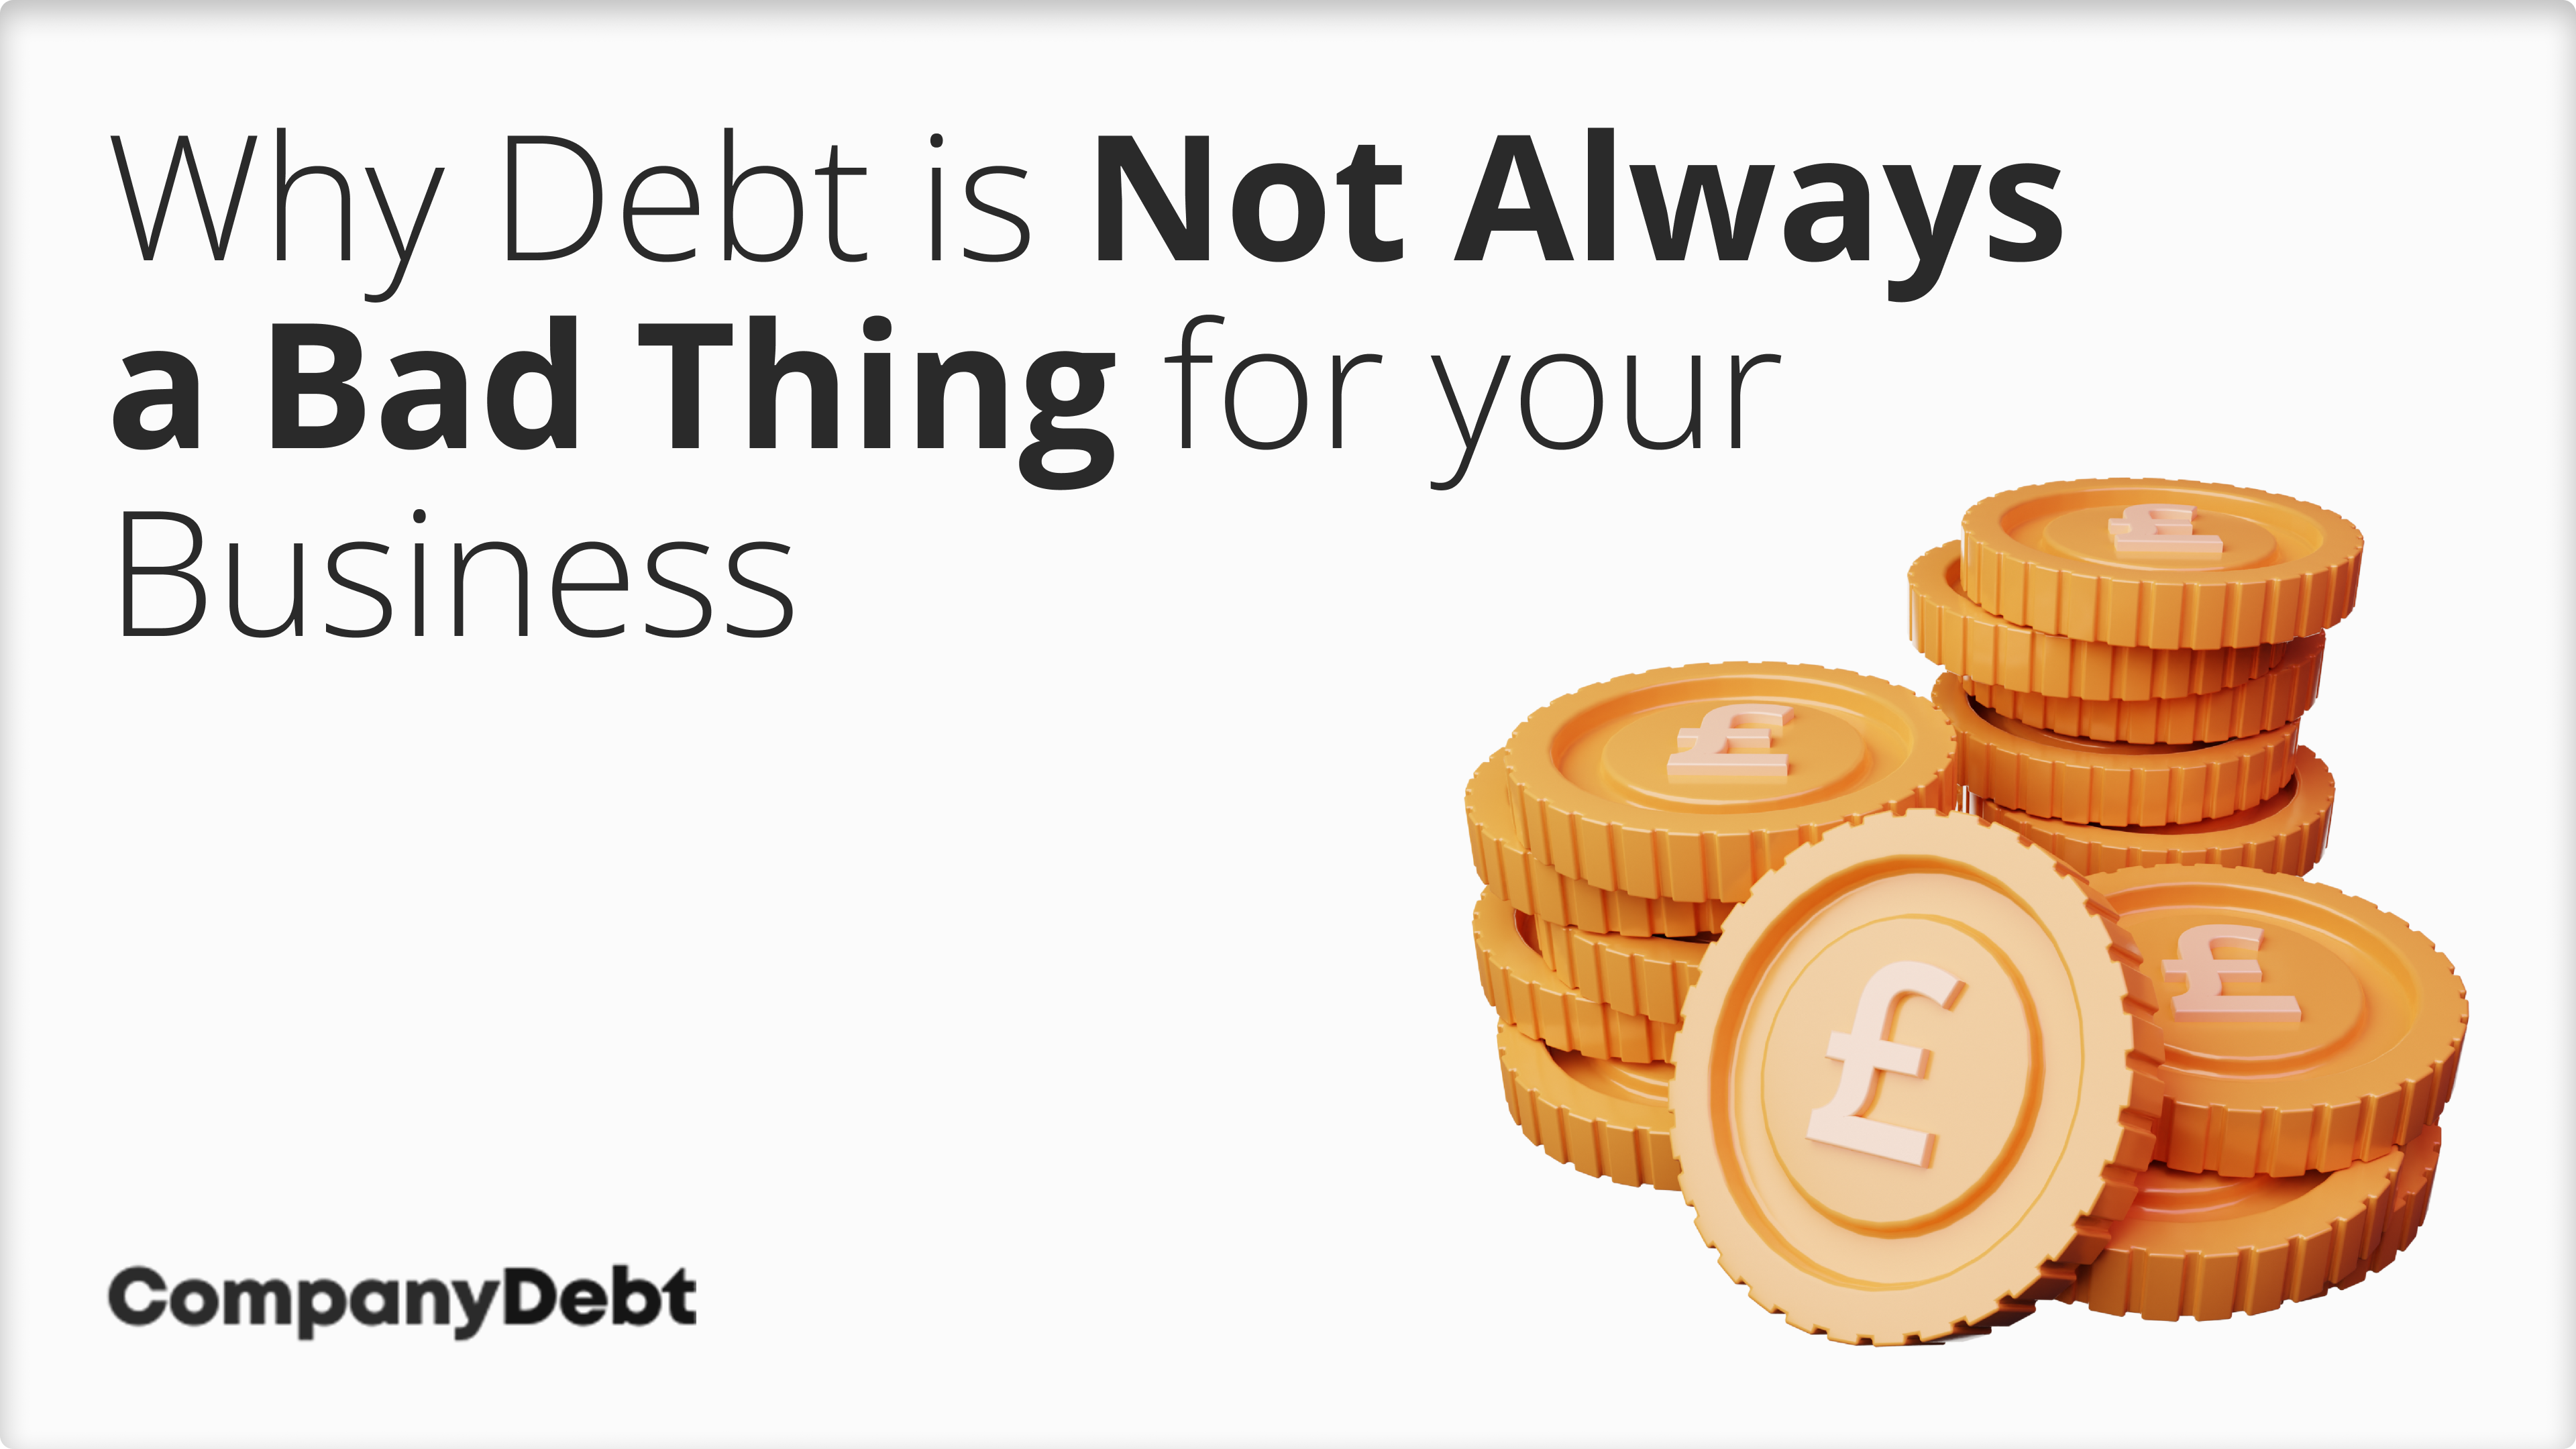 Why-Debt-is-not-always-a-Bad-Thing-for-your-Business